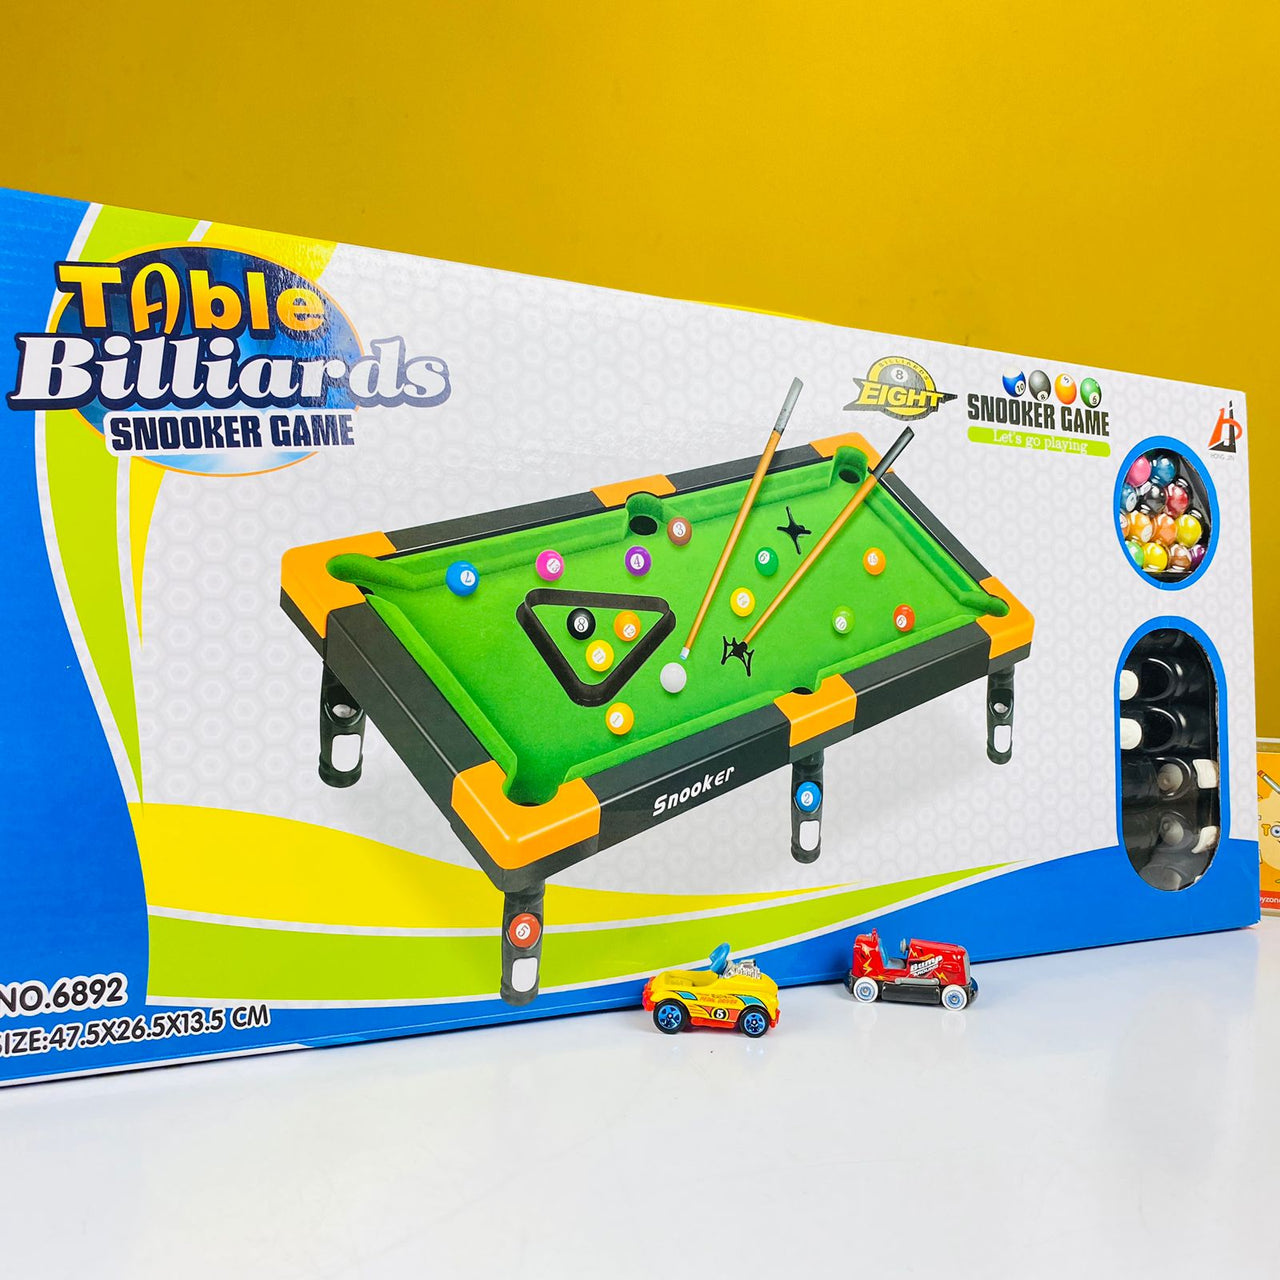 table billiards snooker game